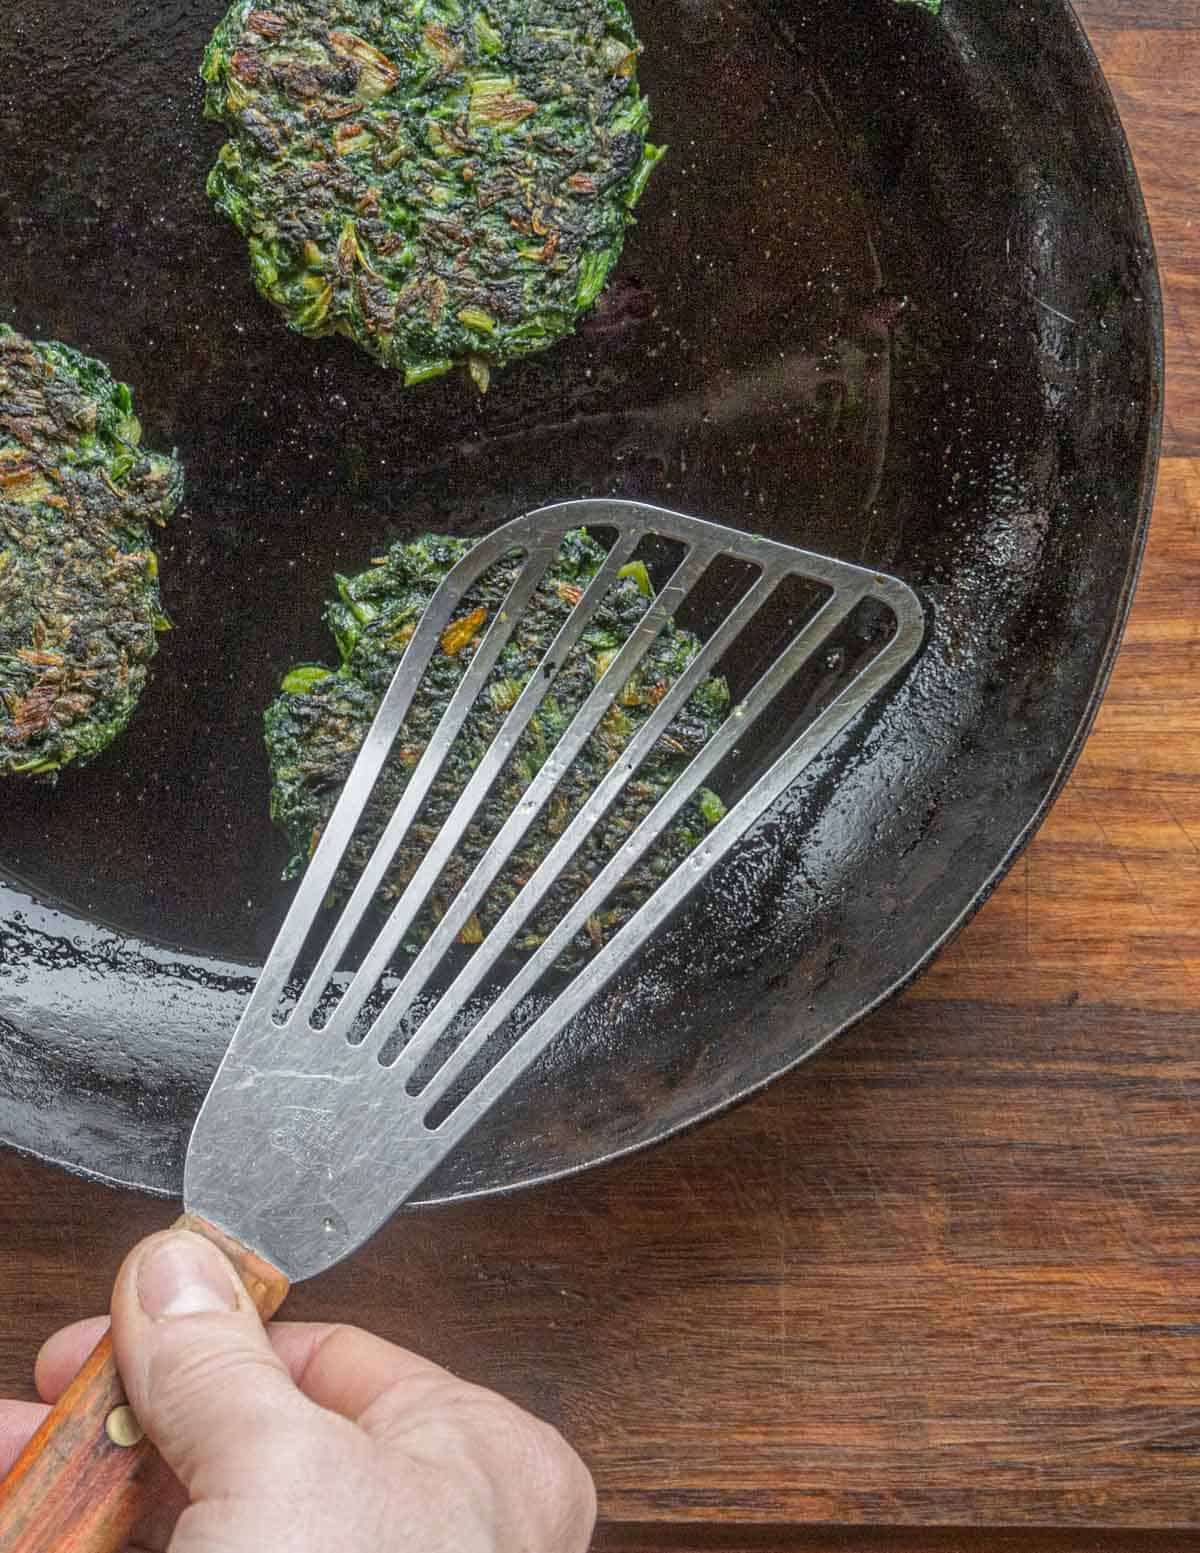 Pressing down on green burgers or spinach patties in a pan.